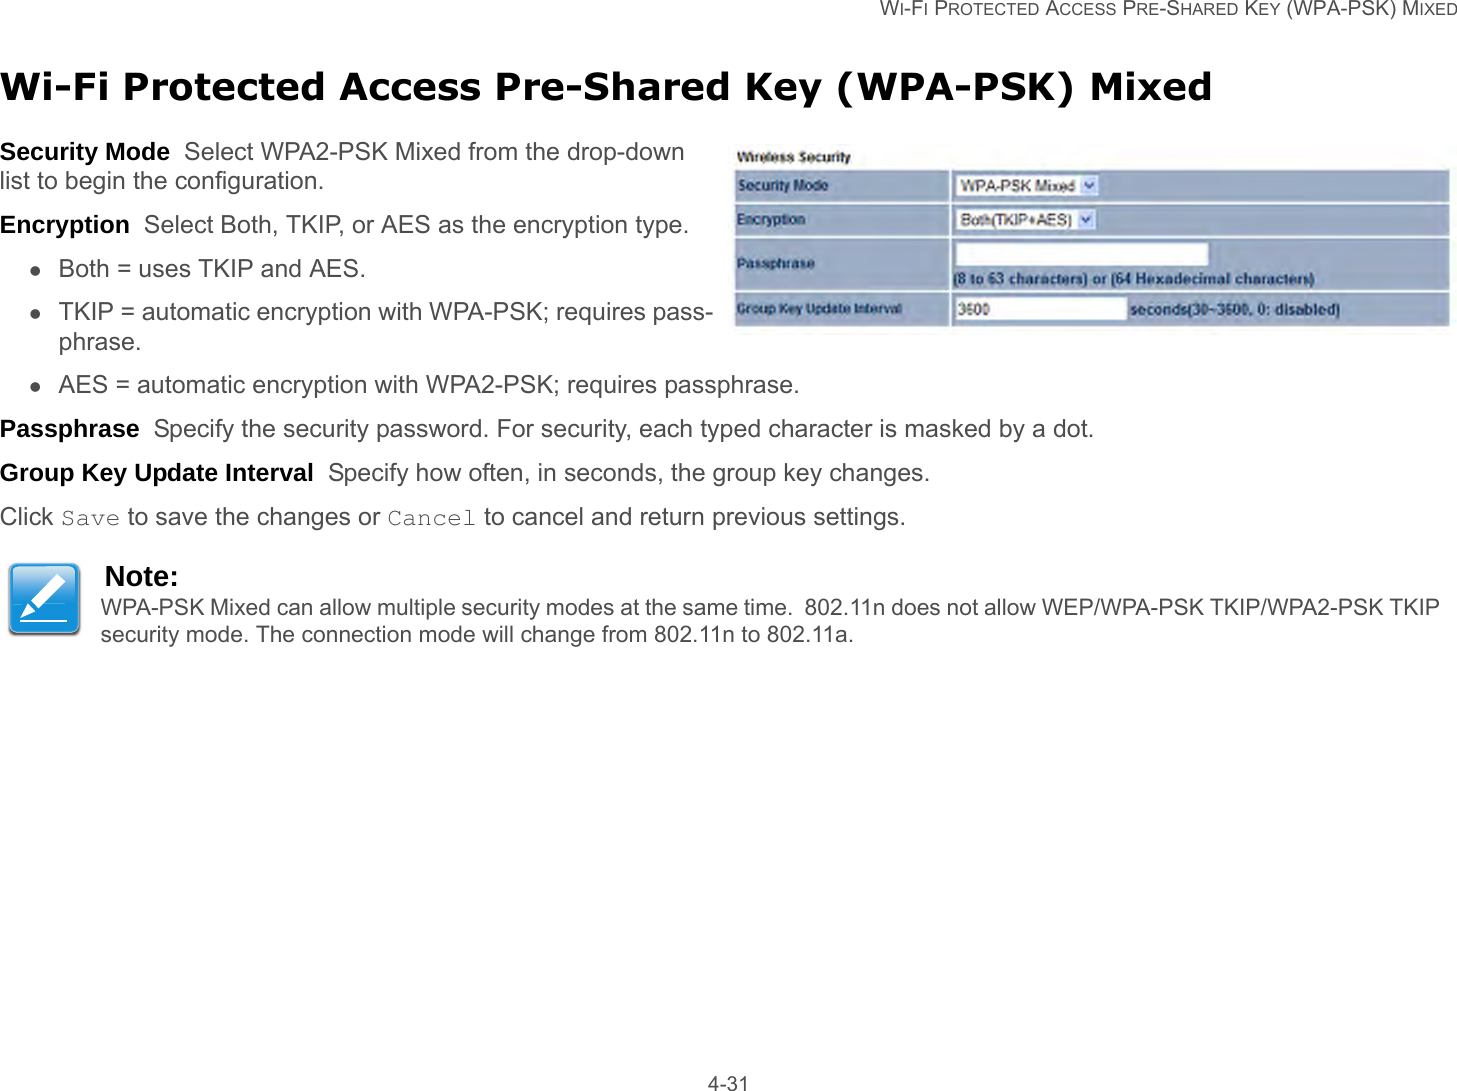   WI-FI PROTECTED ACCESS PRE-SHARED KEY (WPA-PSK) MIXED 4-31Wi-Fi Protected Access Pre-Shared Key (WPA-PSK) MixedSecurity Mode  Select WPA2-PSK Mixed from the drop-down list to begin the configuration.Encryption  Select Both, TKIP, or AES as the encryption type.Both = uses TKIP and AES.TKIP = automatic encryption with WPA-PSK; requires pass-phrase.AES = automatic encryption with WPA2-PSK; requires passphrase.Passphrase  Specify the security password. For security, each typed character is masked by a dot.Group Key Update Interval  Specify how often, in seconds, the group key changes.Click Save to save the changes or Cancel to cancel and return previous settings.Note:WPA-PSK Mixed can allow multiple security modes at the same time.  802.11n does not allow WEP/WPA-PSK TKIP/WPA2-PSK TKIP security mode. The connection mode will change from 802.11n to 802.11a.